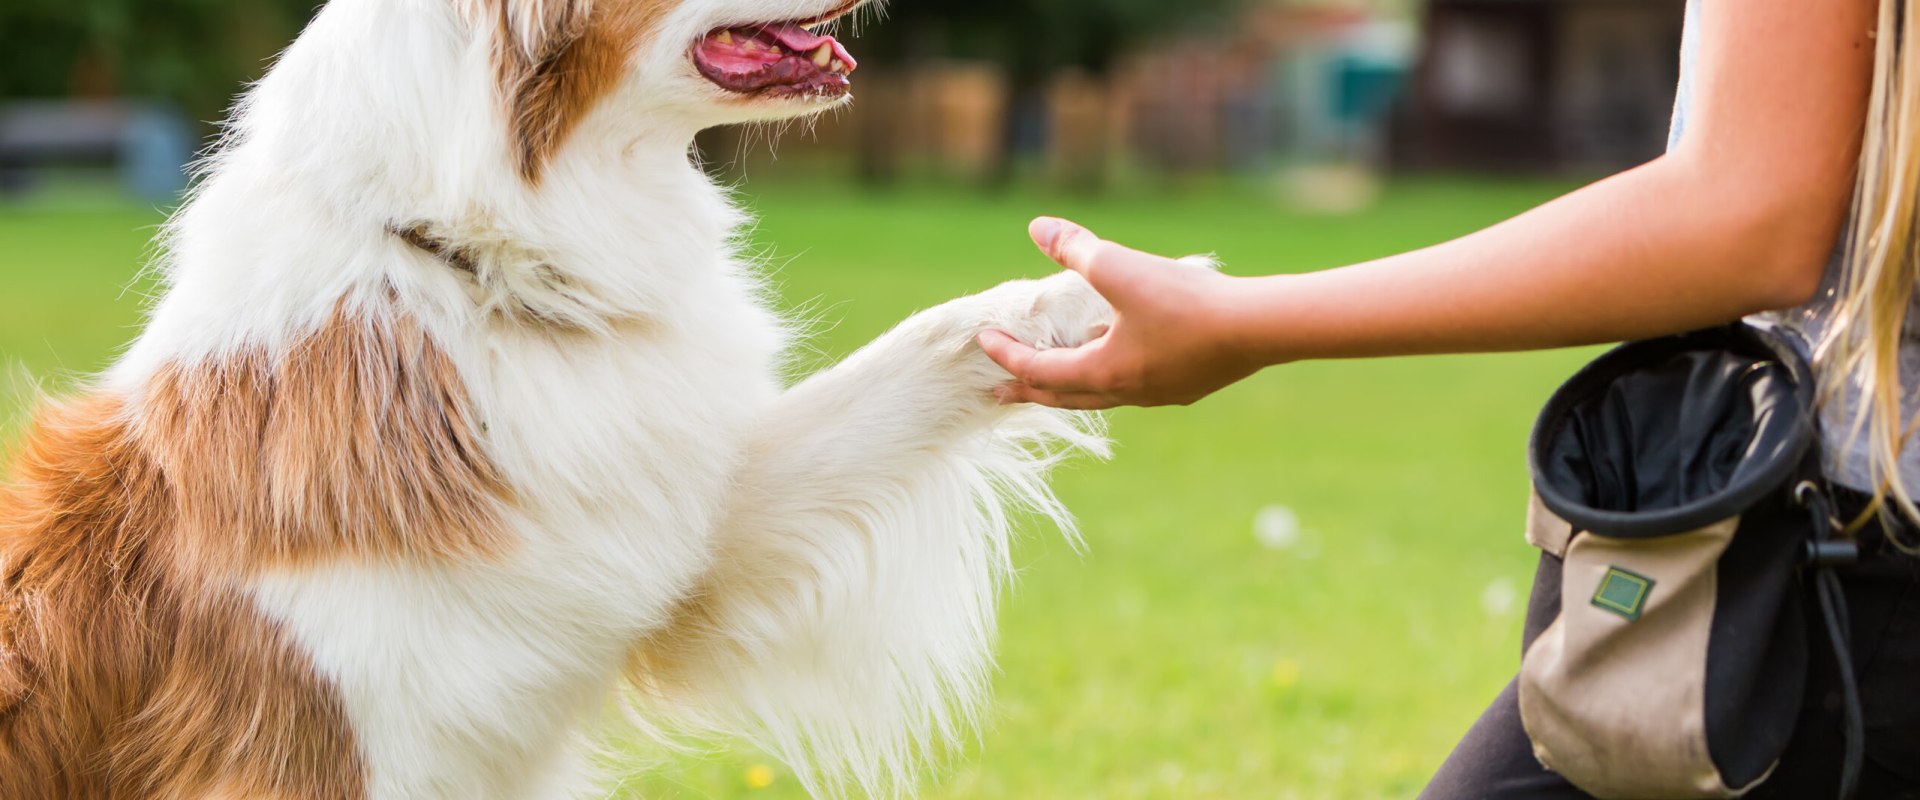 The Best Way to Socialize a Dog: Expert Tips for Successful Dog Ownership